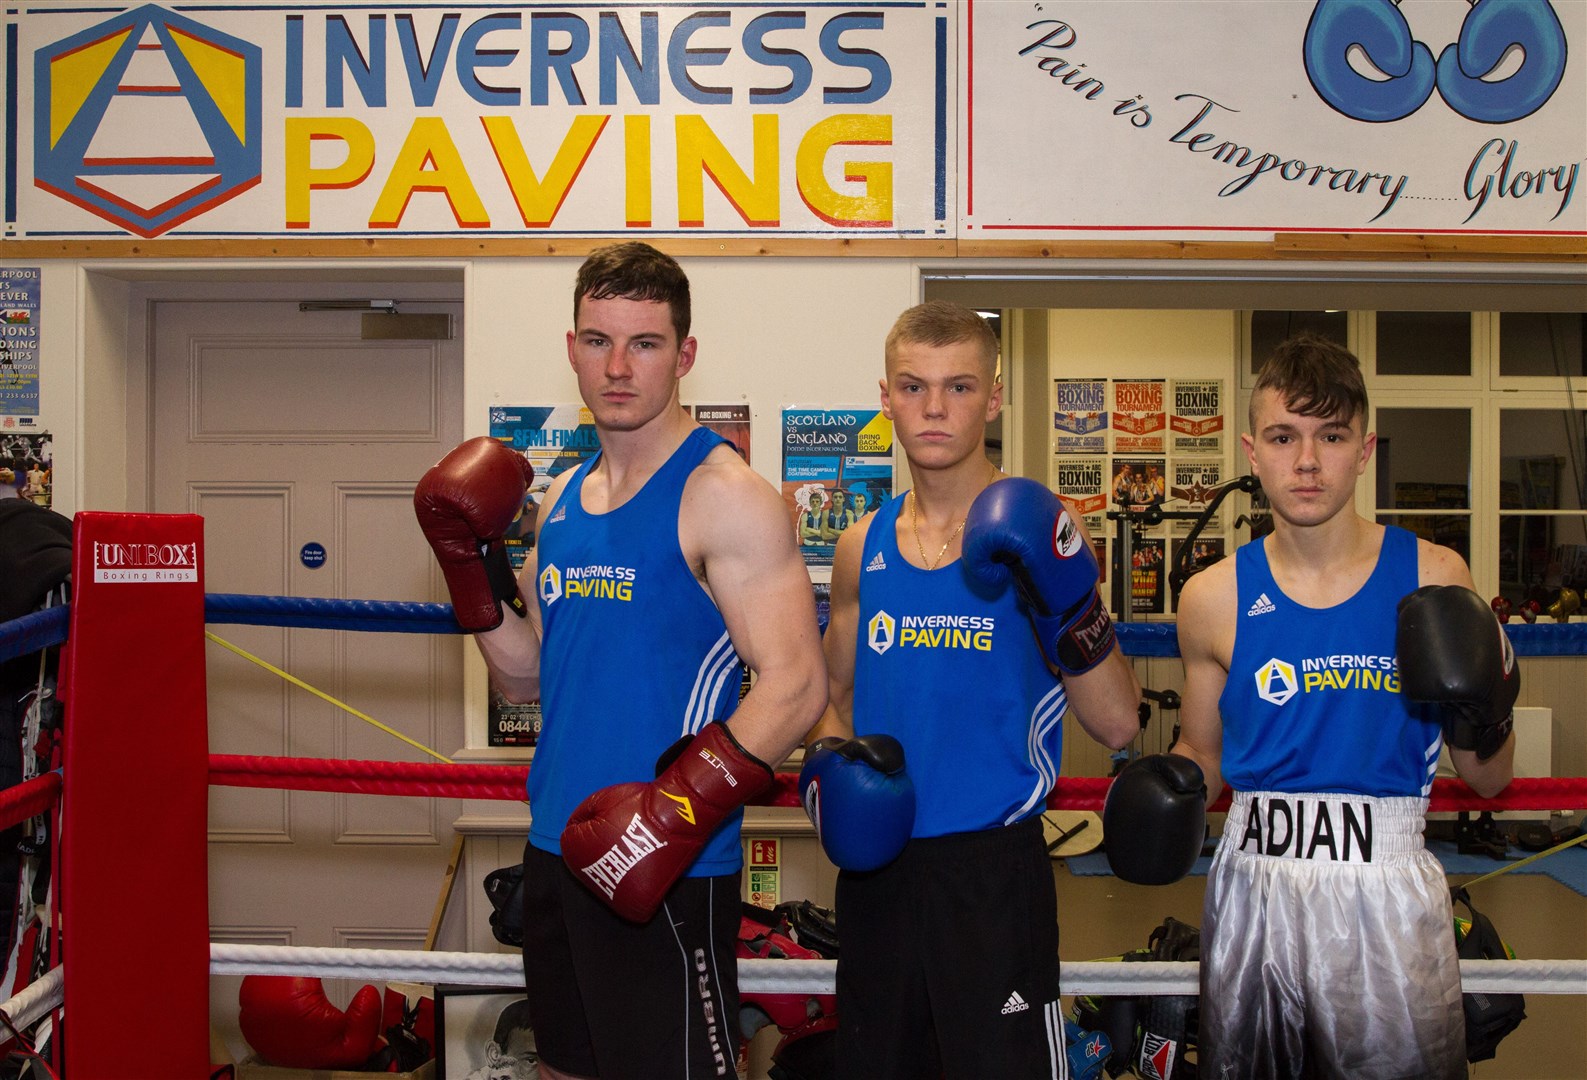 Ross-shire boxers Steven Munro, Ben Bartlett and Adian Williamson from Inverness City Boxing Club. Picture: Donald Cameron